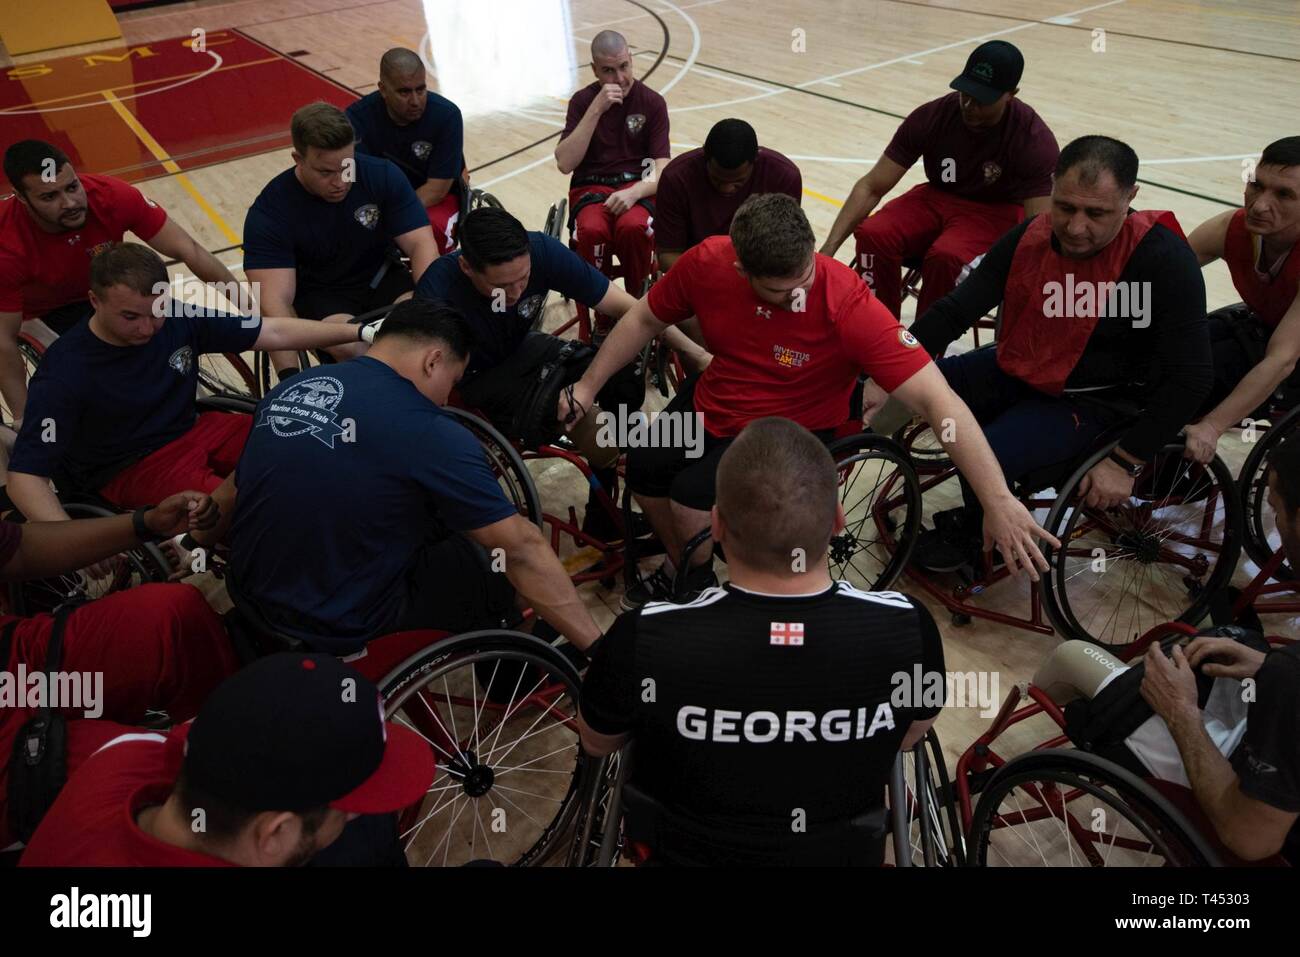 Coach Joey Gugliotta breaks down the participants after a wheelchair basketball practice during the 2019 Marine Corps Trials  at Marine Corps Base Camp Pendleton, California, Feb. 27. The Marine Corps Trials promotes rehabilitation through adaptive sports participation and serves as the primary venue to select Marine Corps participants for the DoD Warrior Games. (Official U.S. Marine Corps Stock Photo